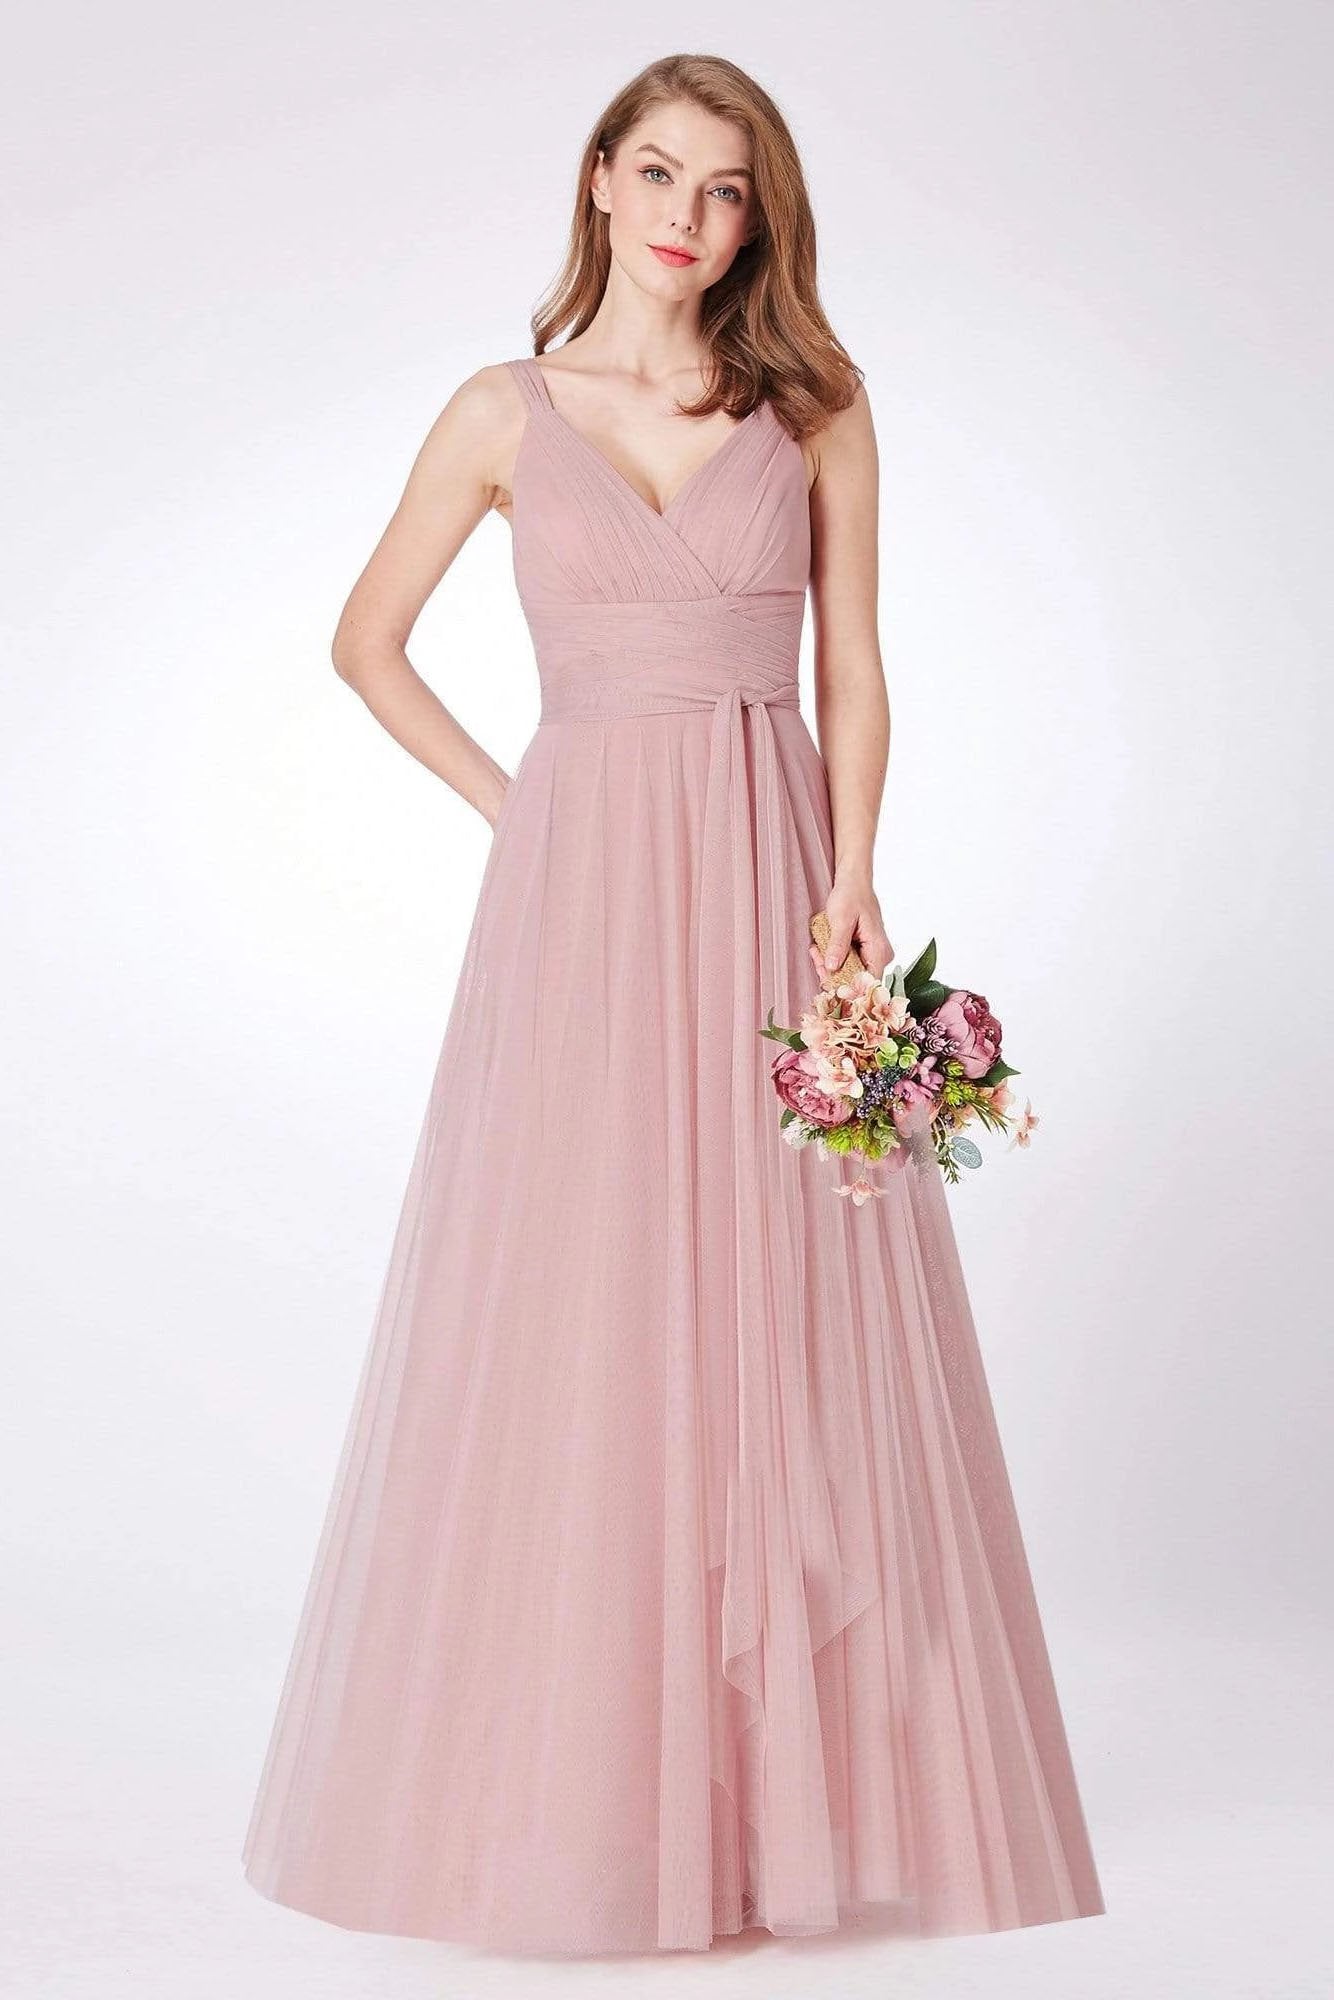 Simple A Line Pink V Neck Tulle Sleeveless Prom Dresses Long Bridesmaid Dresses STC15383